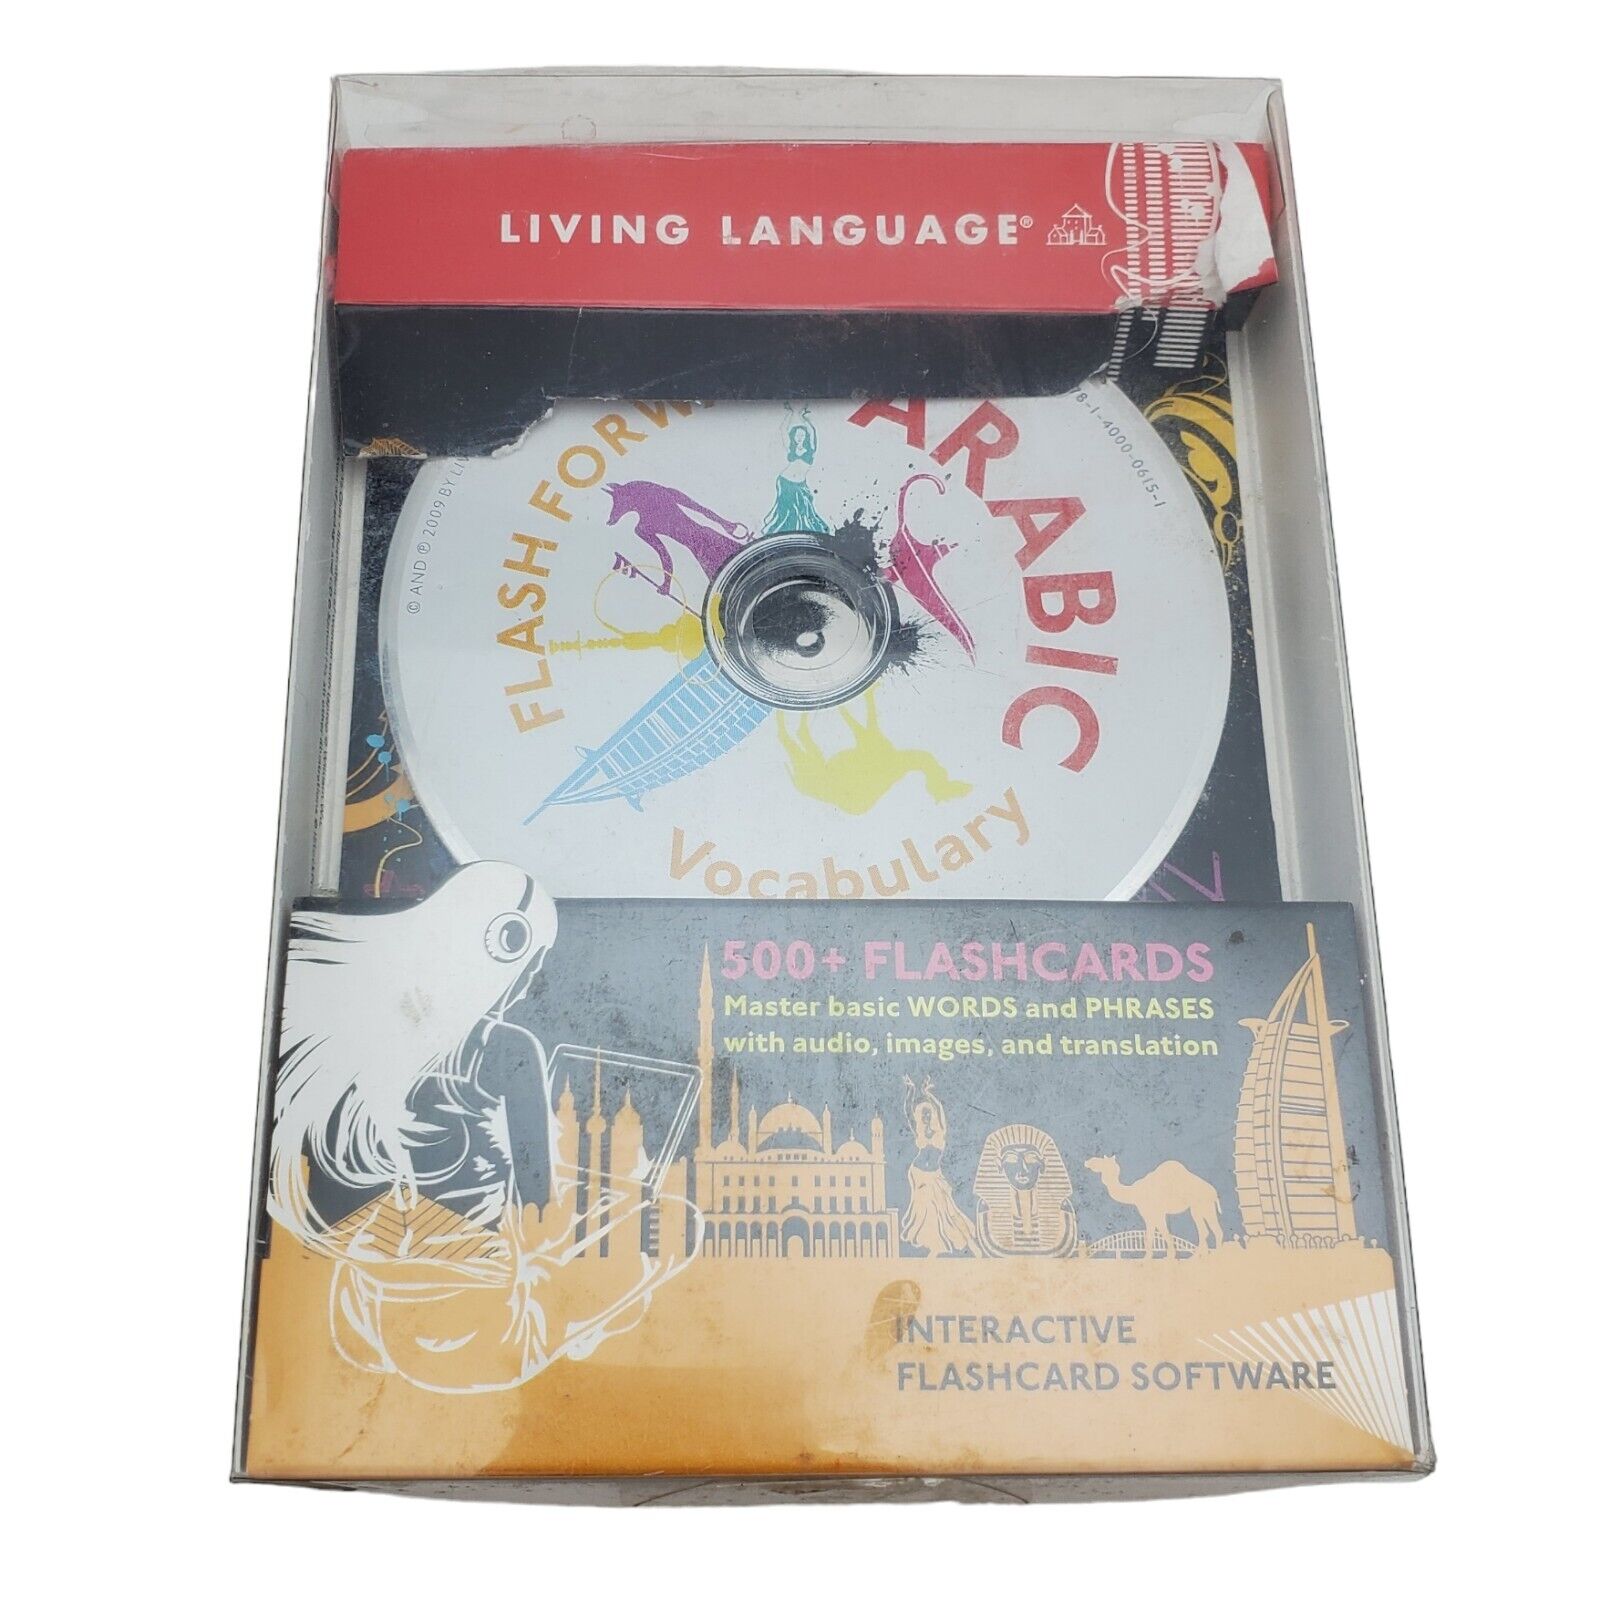 Living Language Arabic CD ROM Interactive Flashcard Software Preowned